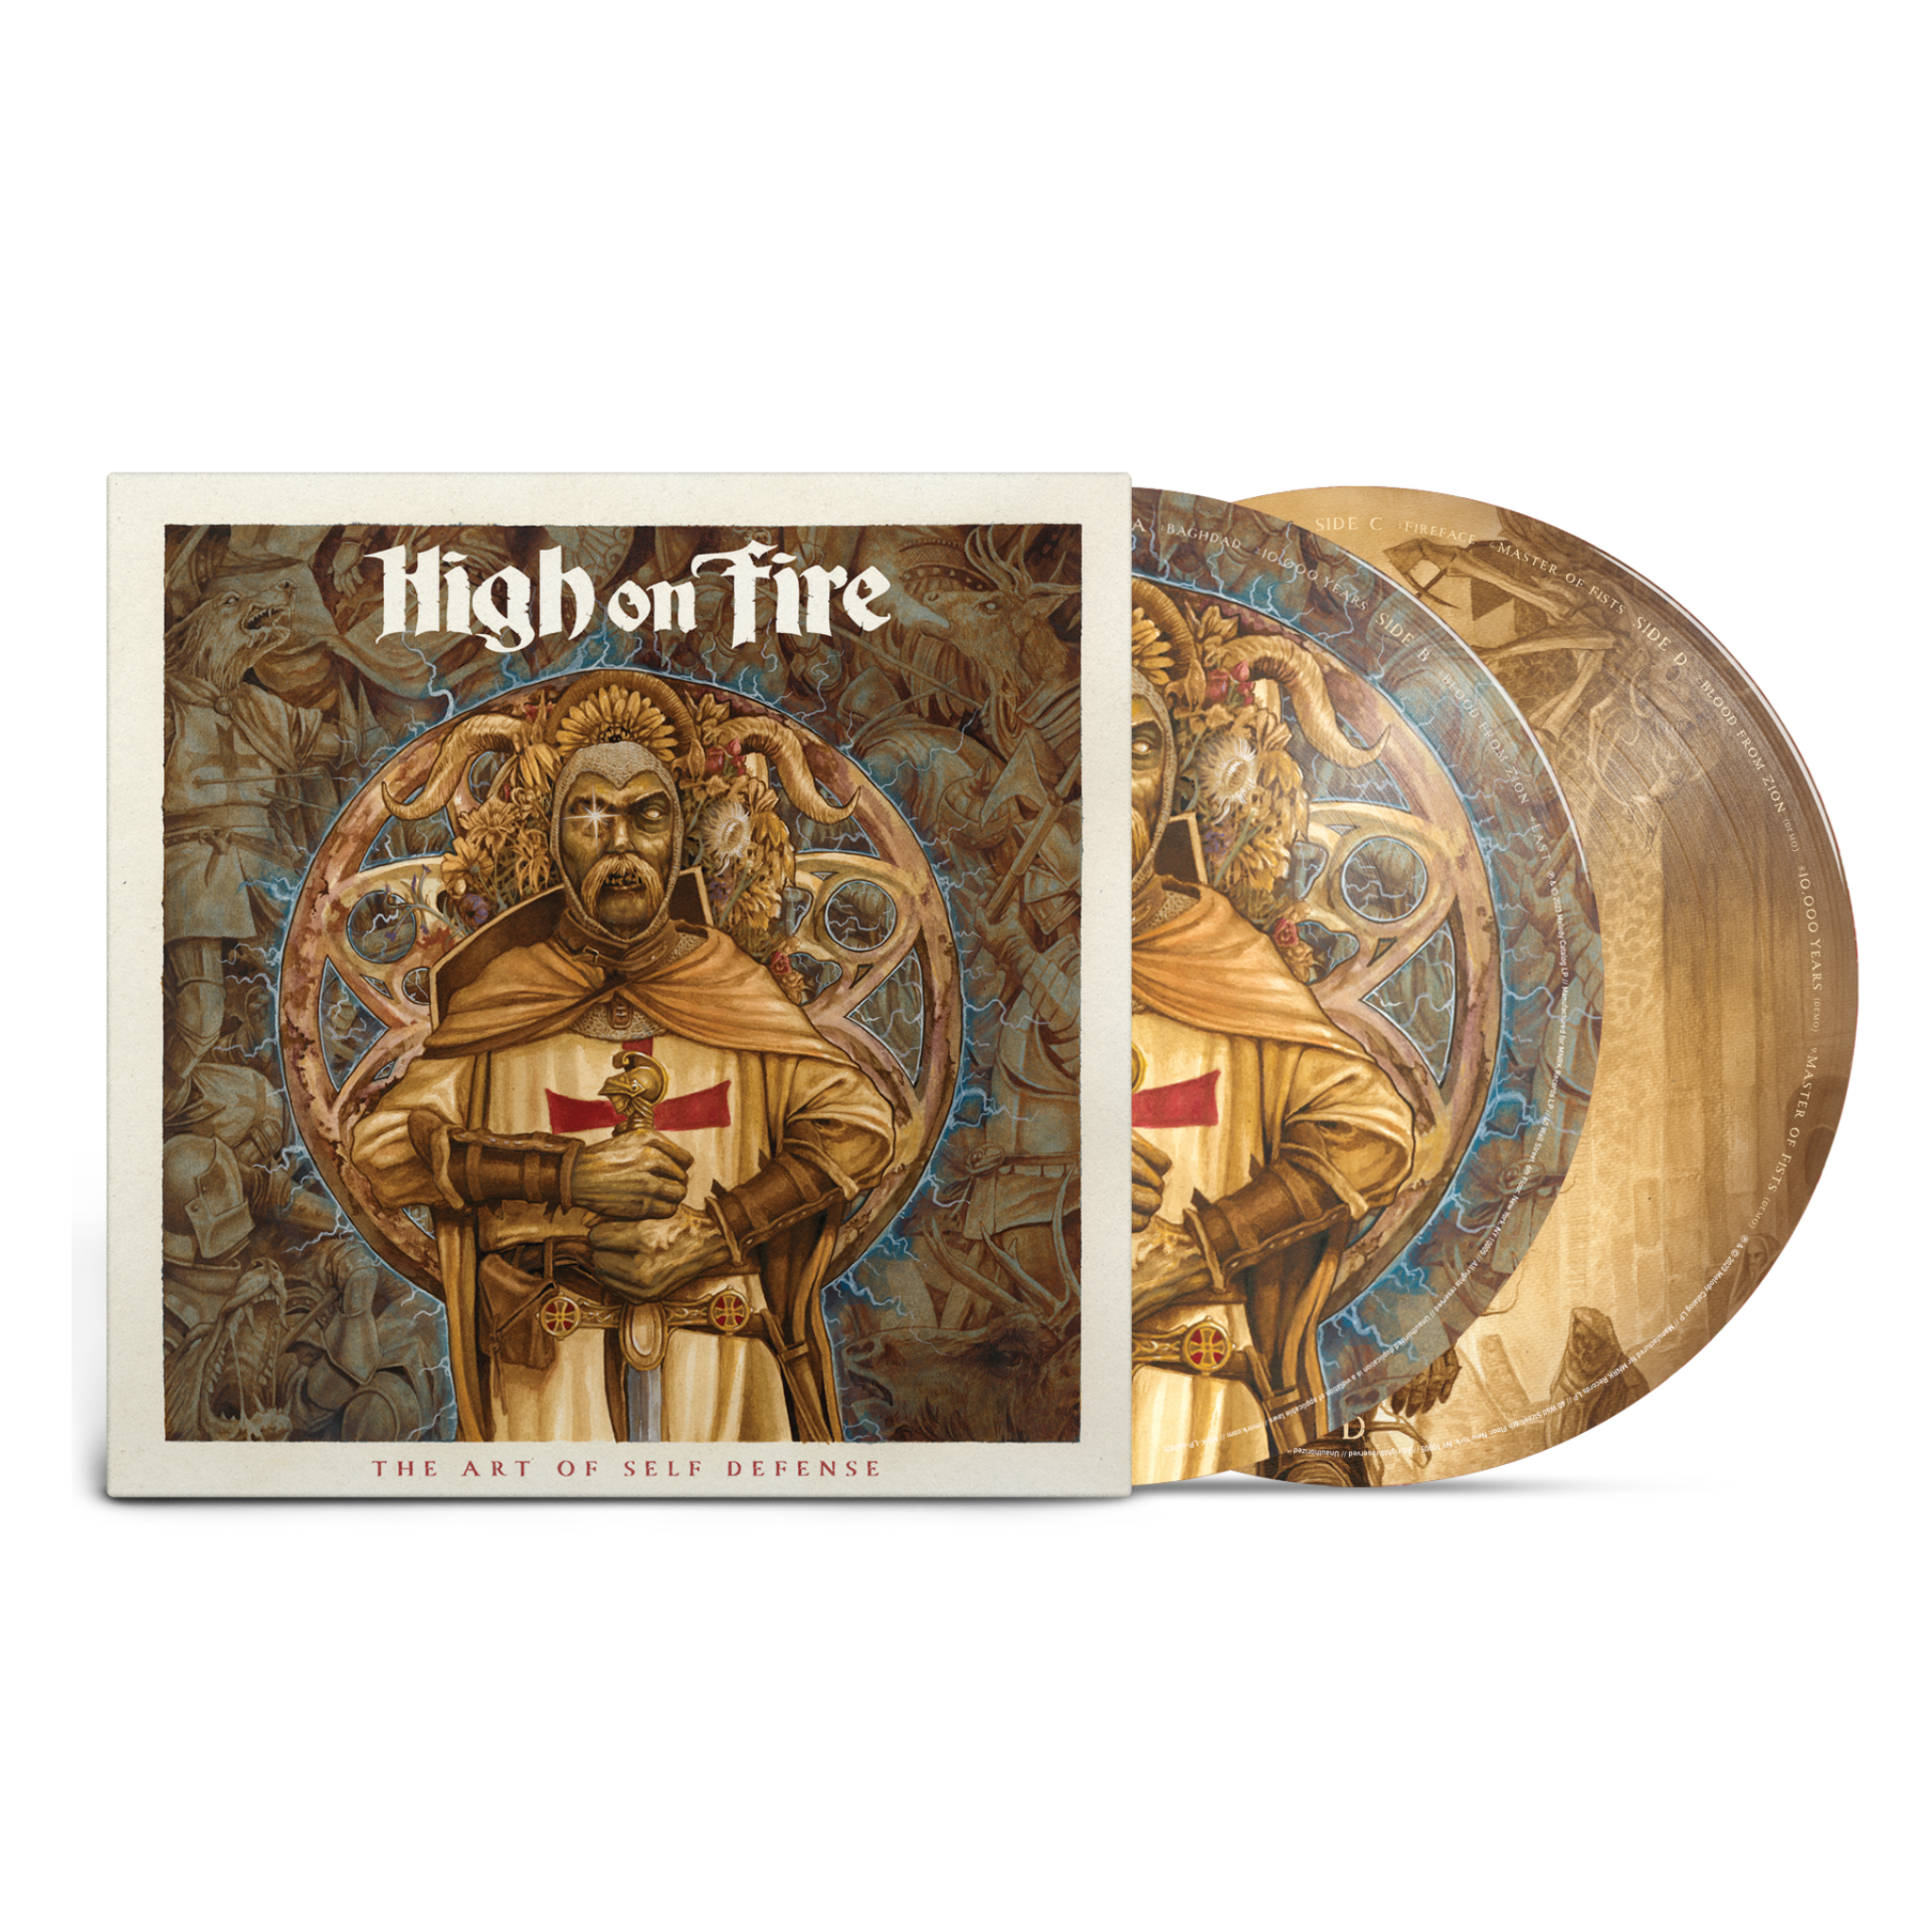 High On Fire - The Art Of Self Defense Picture Disc Vinyl